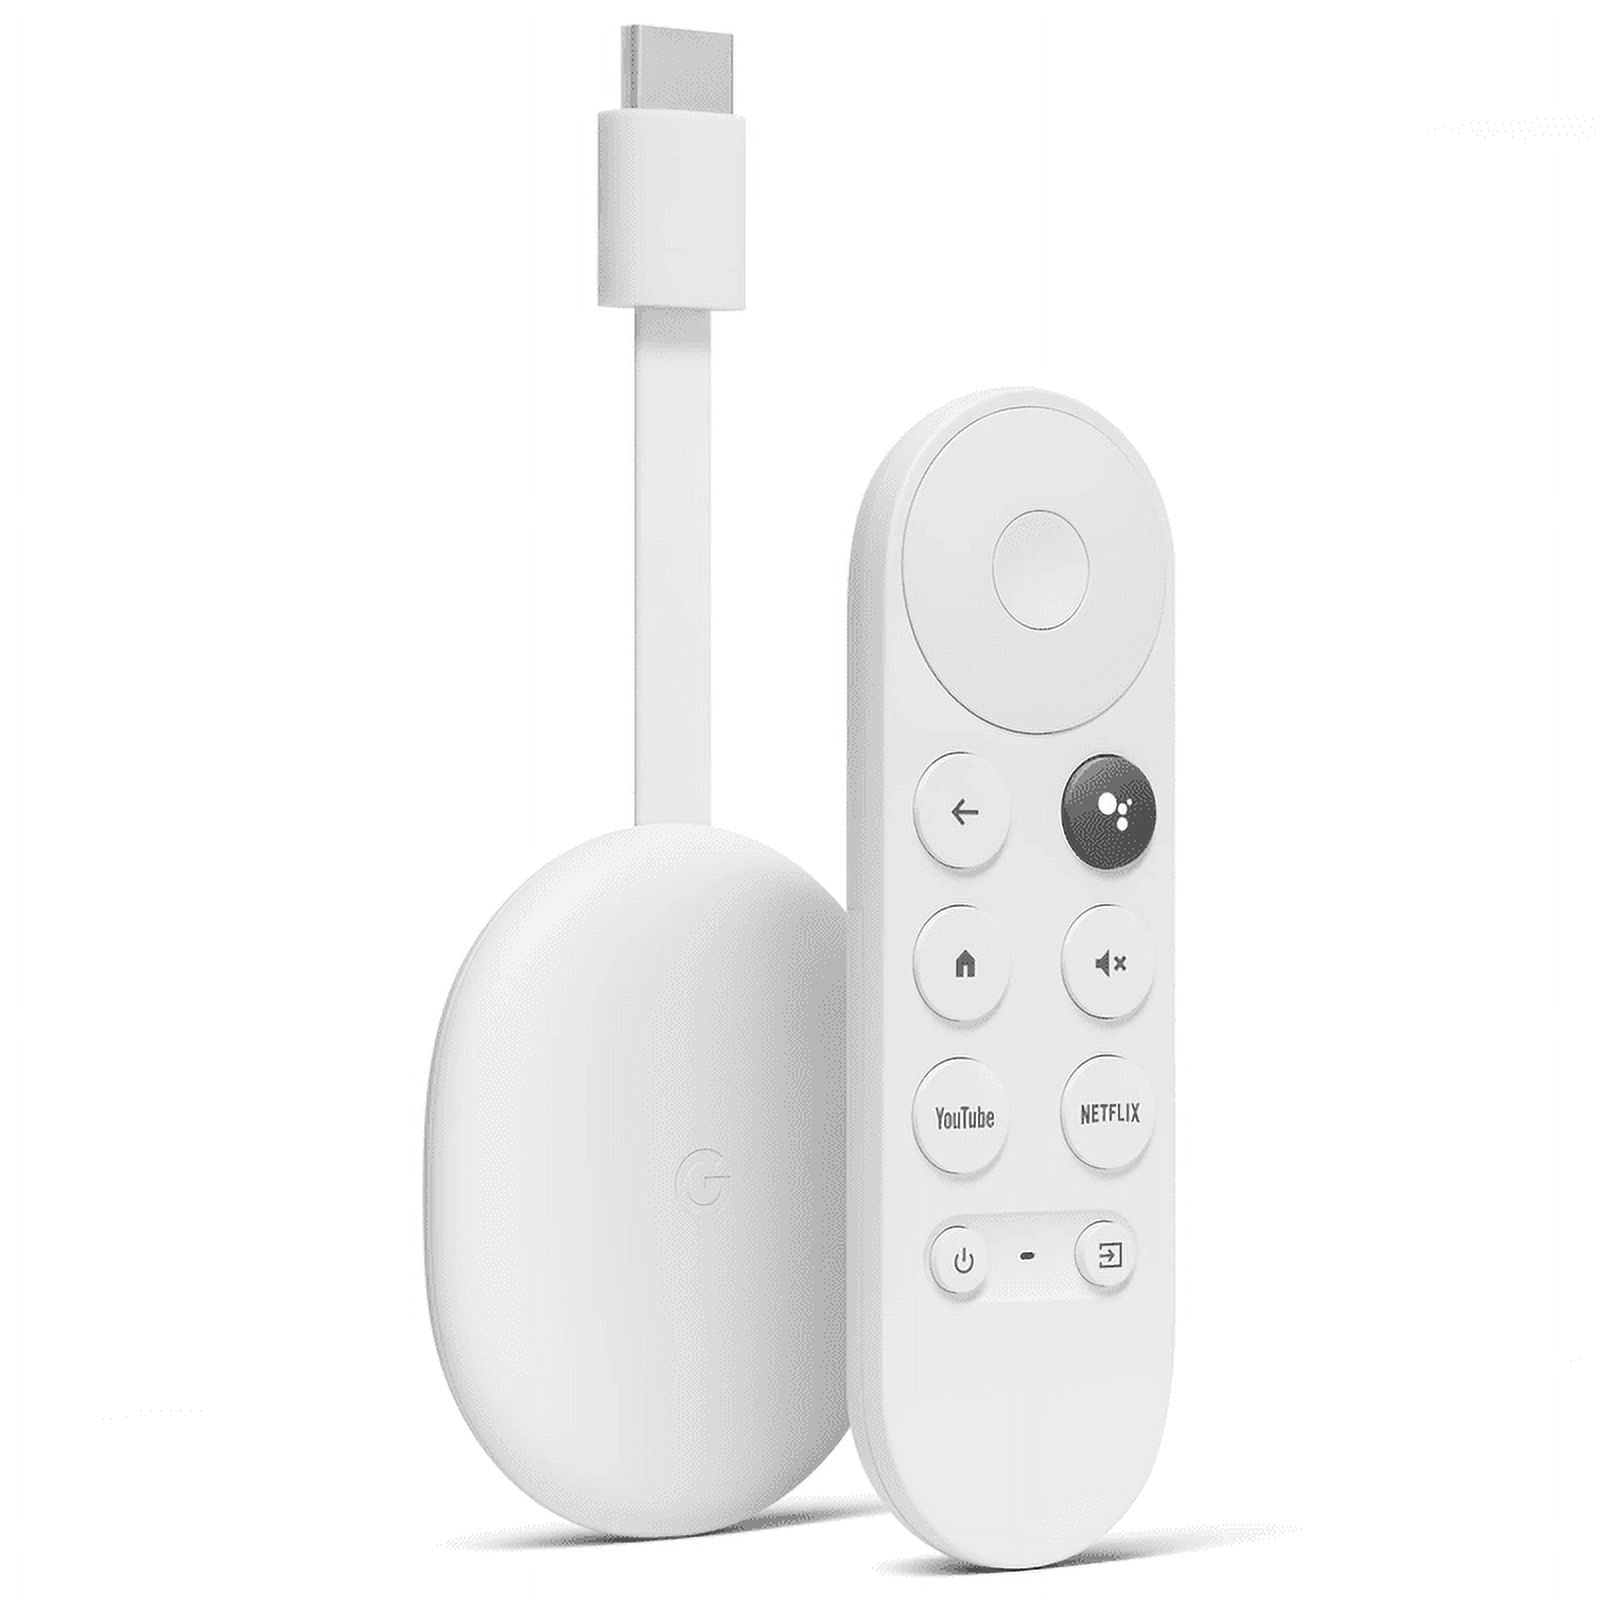 Chromecast with Google TV (HD) - Streaming Stick Entertainment on Your TV  with Voice Search - Watch Movies, Shows, and Live TV in 1080p HD - Snow